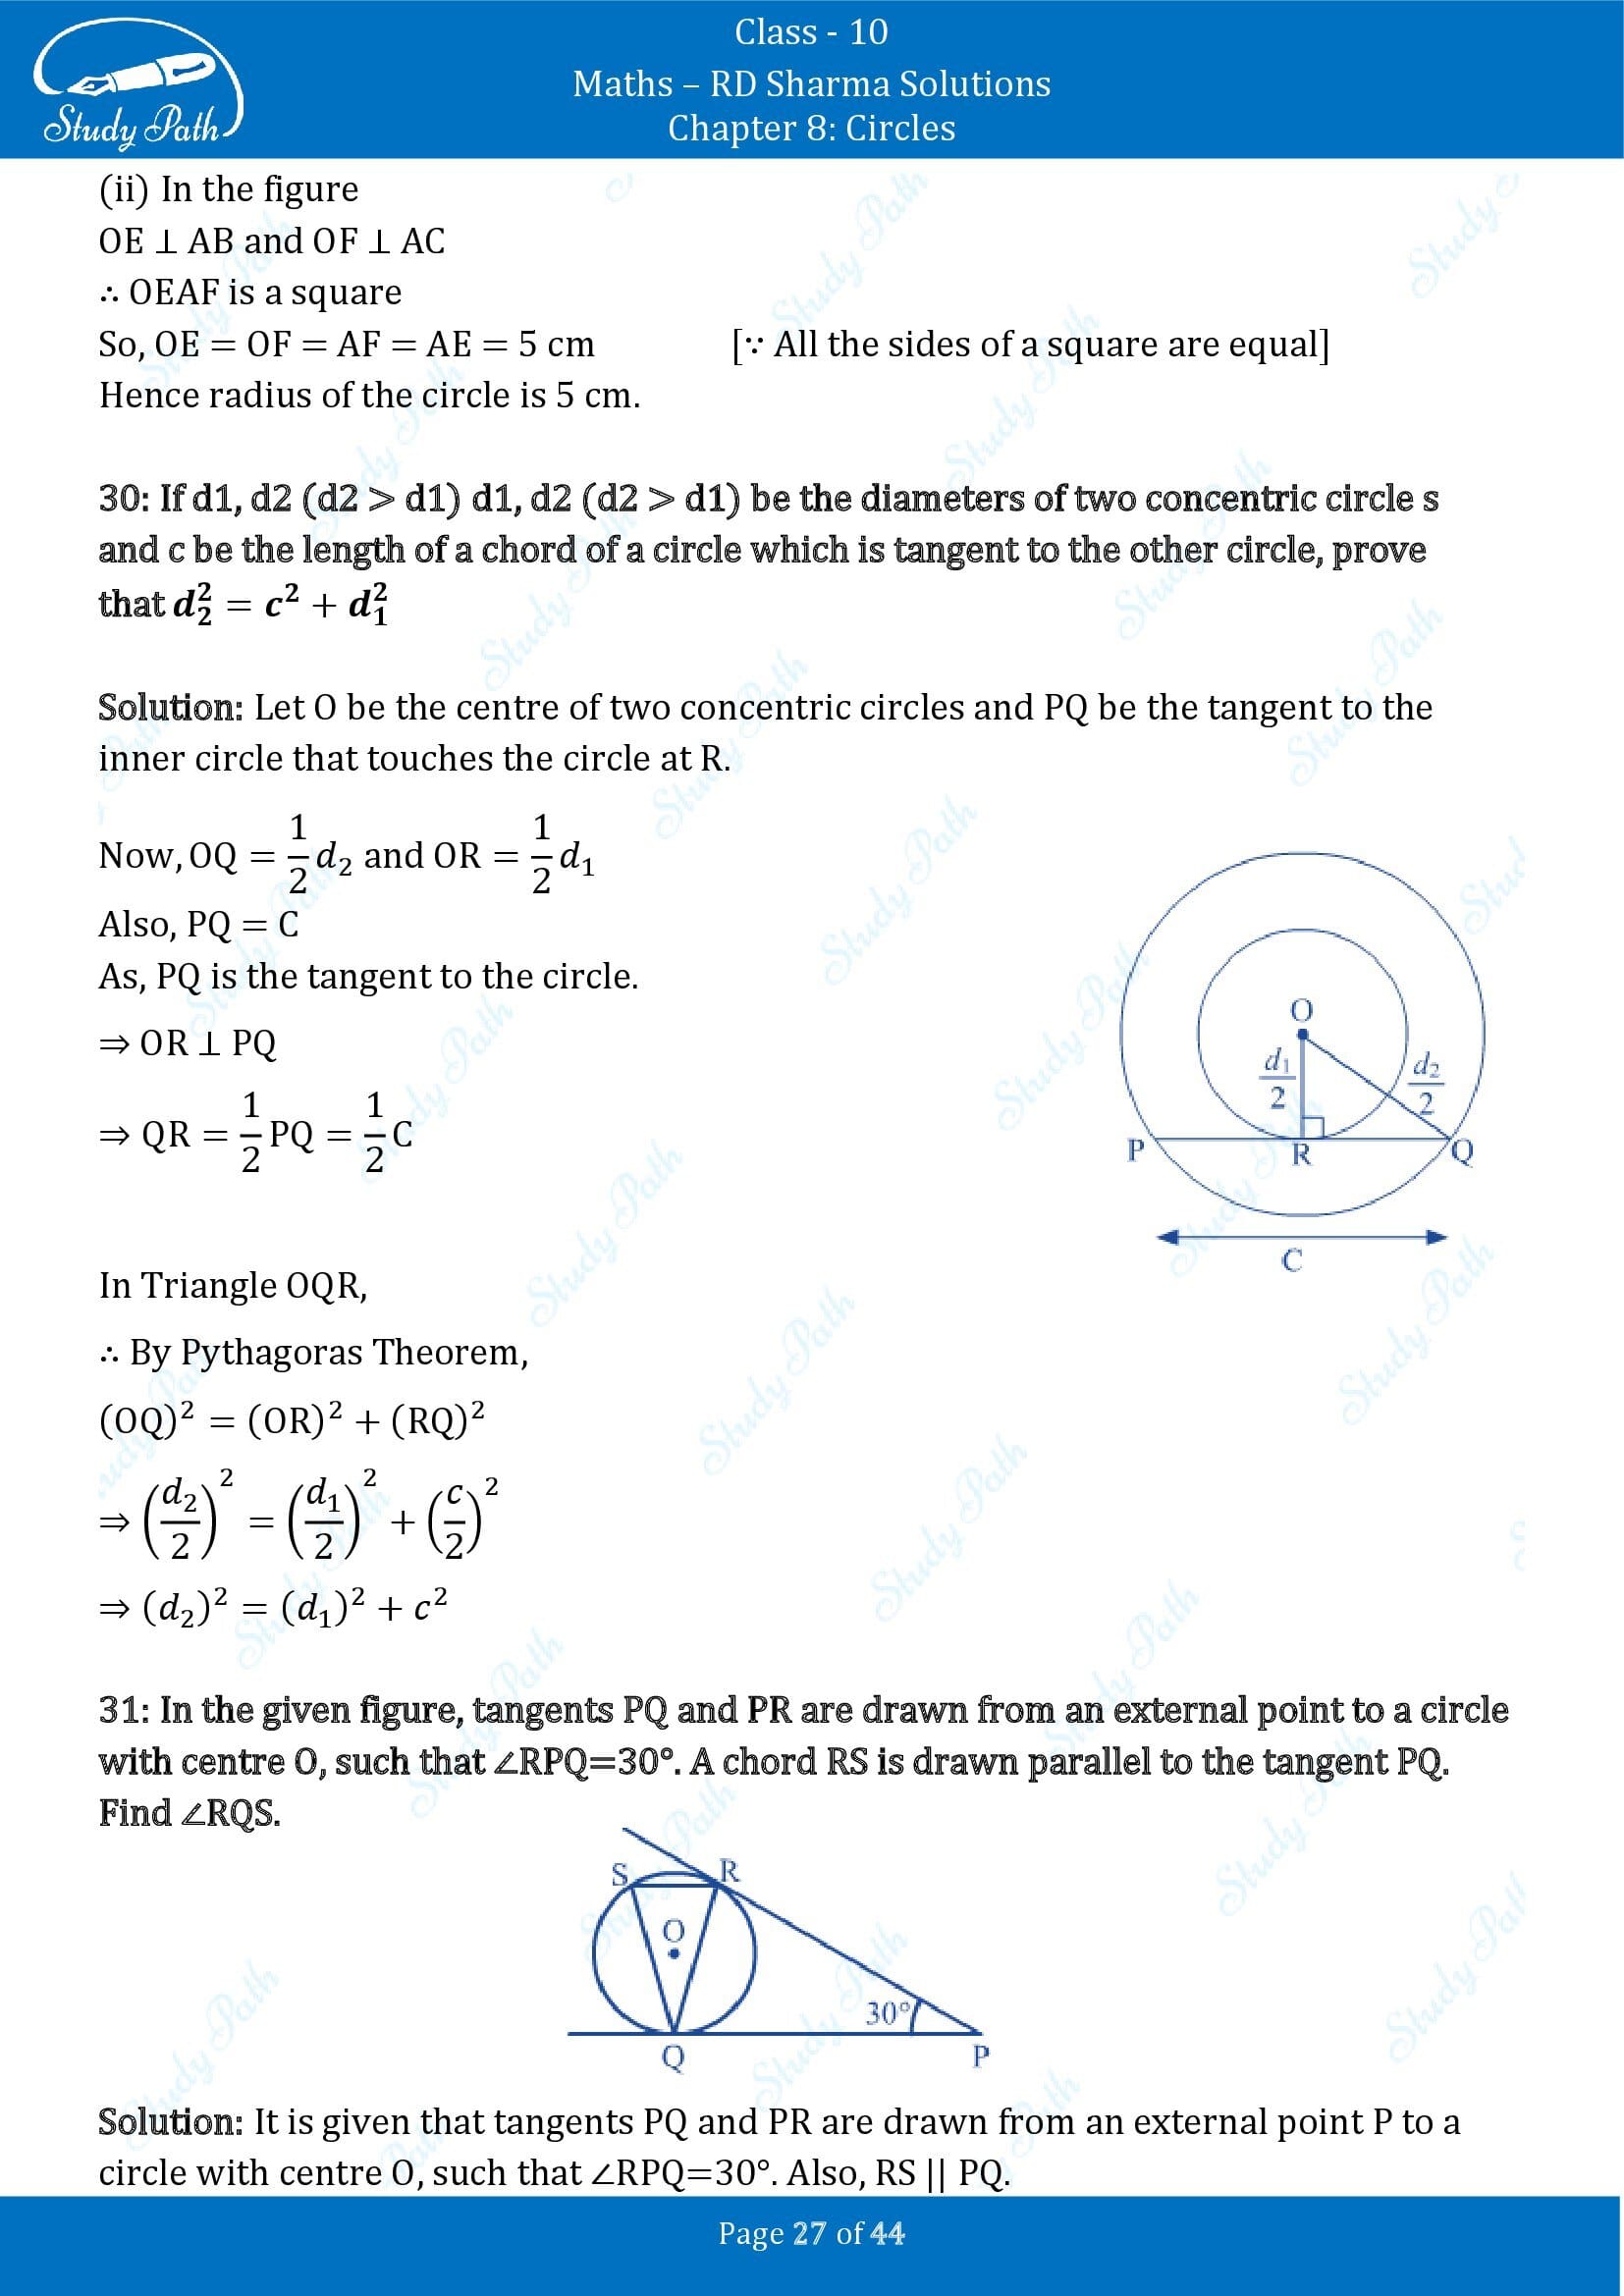 RD Sharma Solutions Class 10 Chapter 8 Circles Exercise 8.2 00027